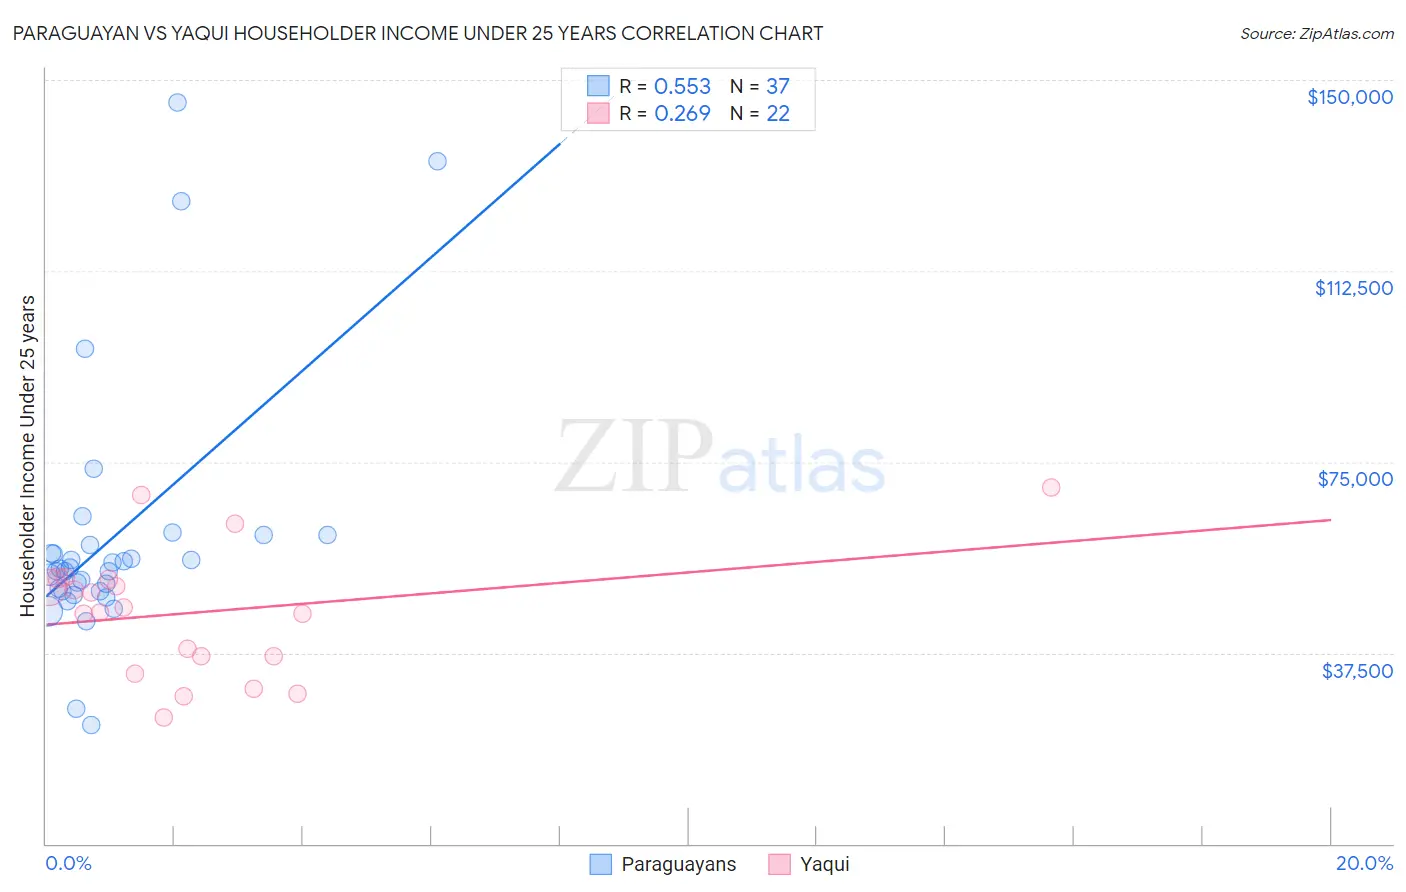 Paraguayan vs Yaqui Householder Income Under 25 years